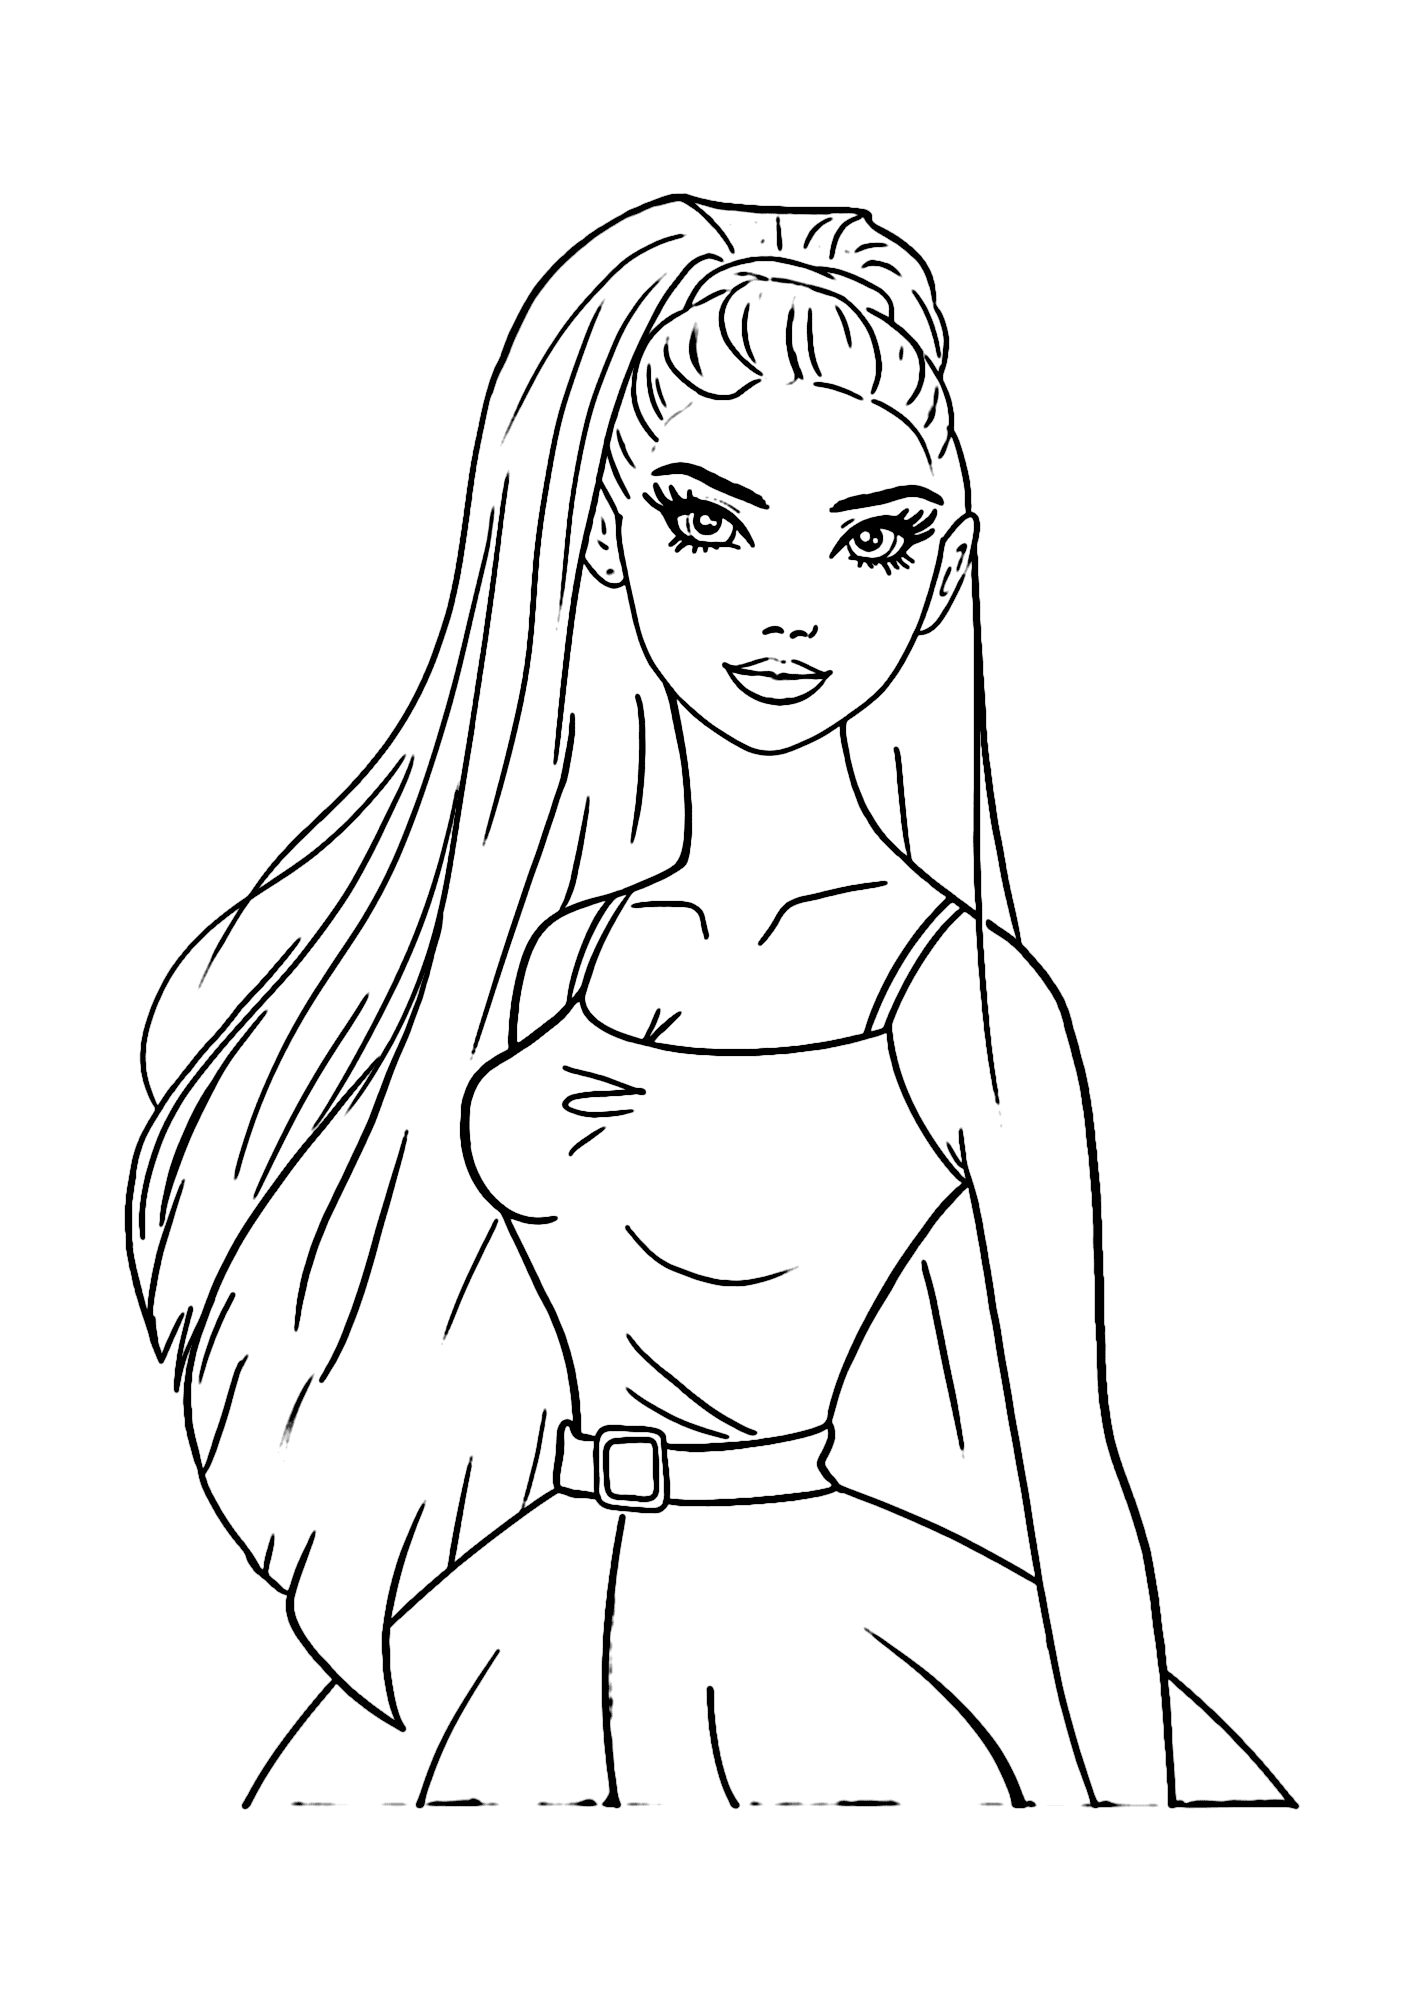 Barbie Wedding Dress Coloring Page